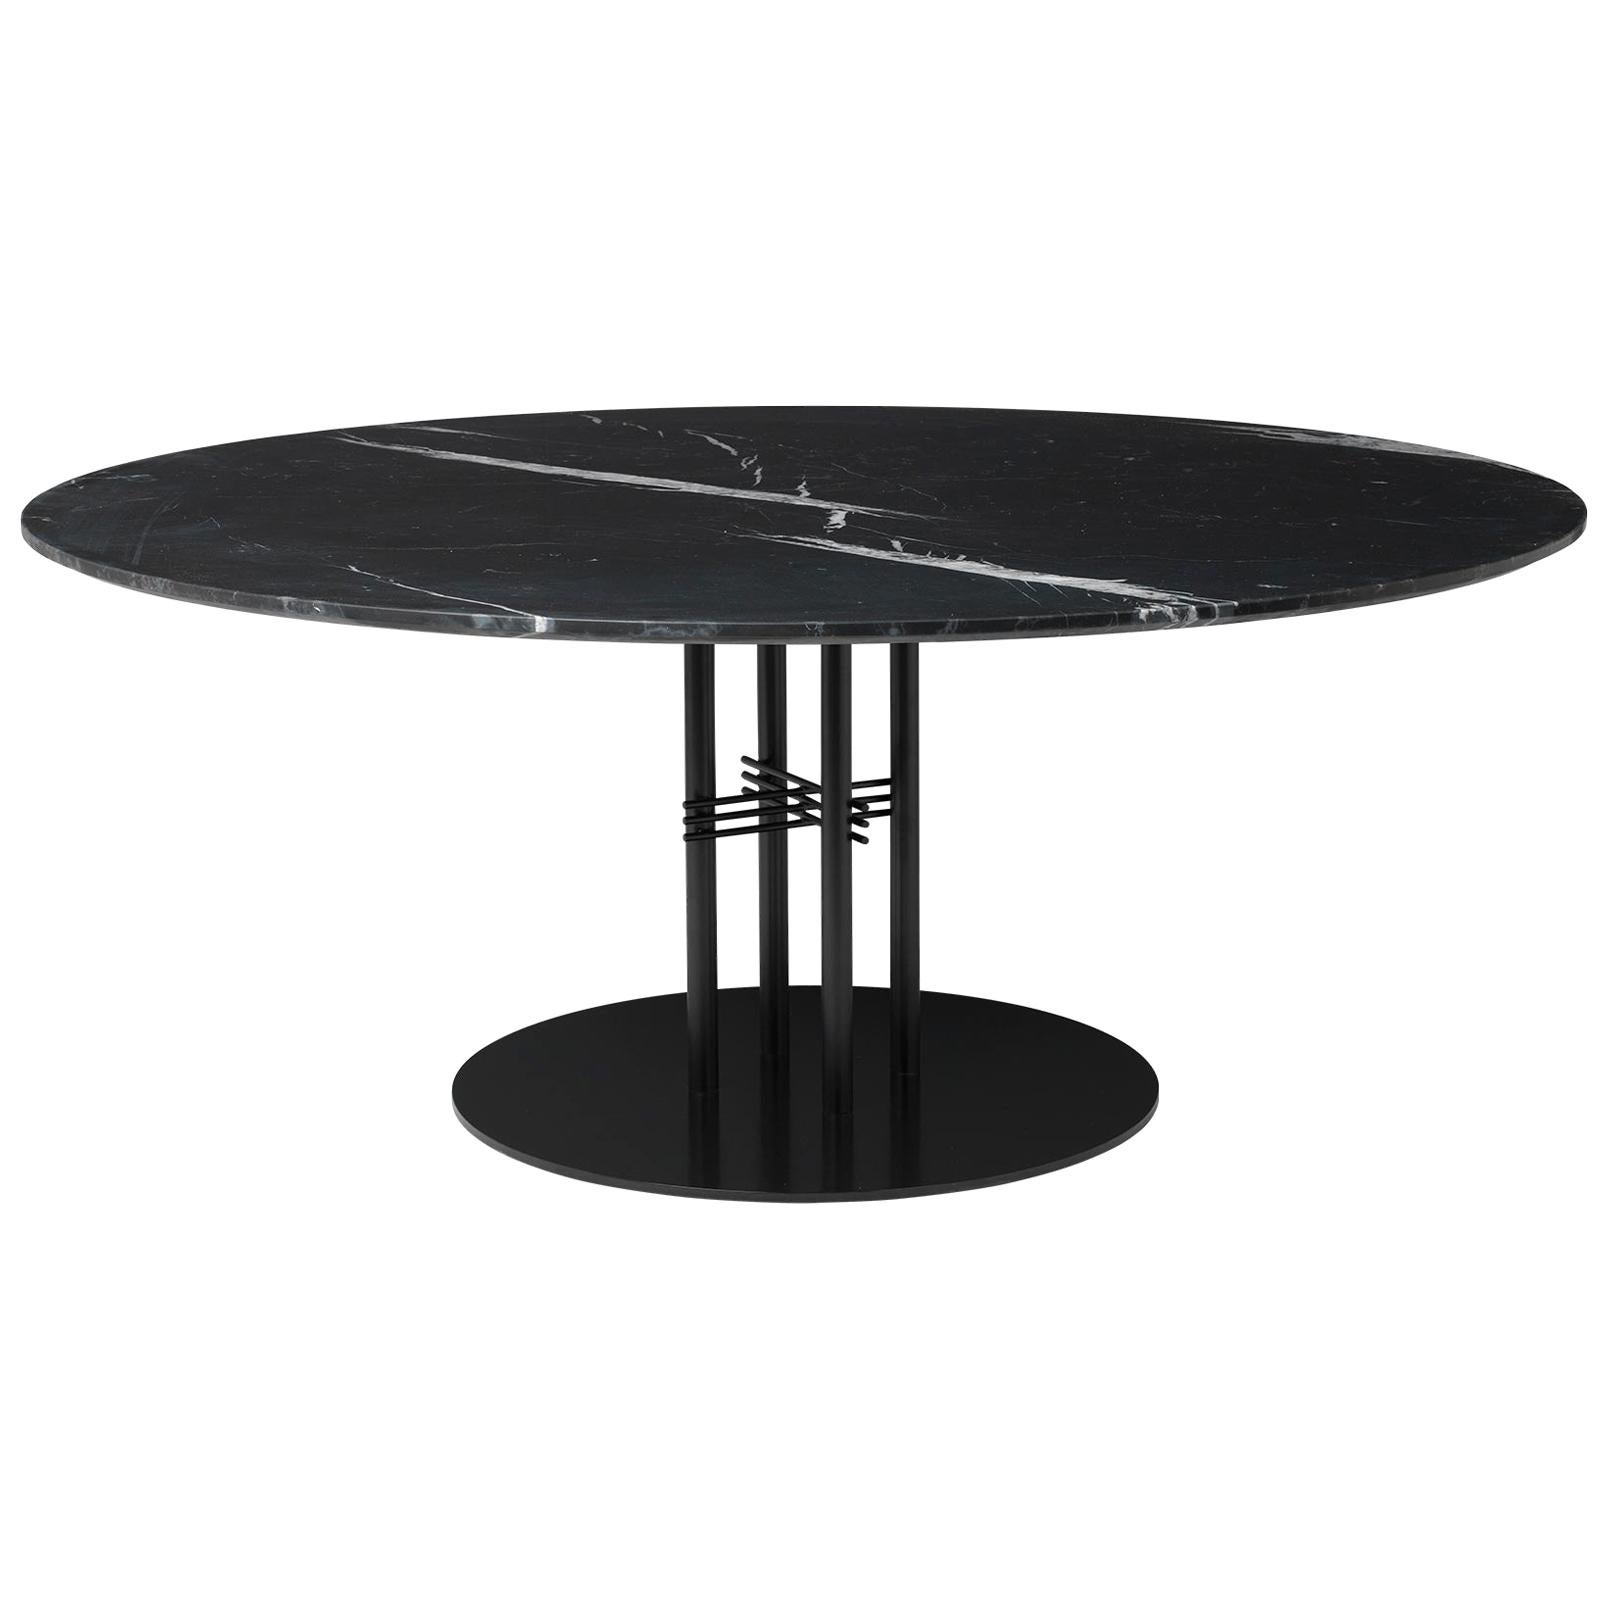 TS Column Lounge Table, Round, Black Base, X-Large, Marble For Sale